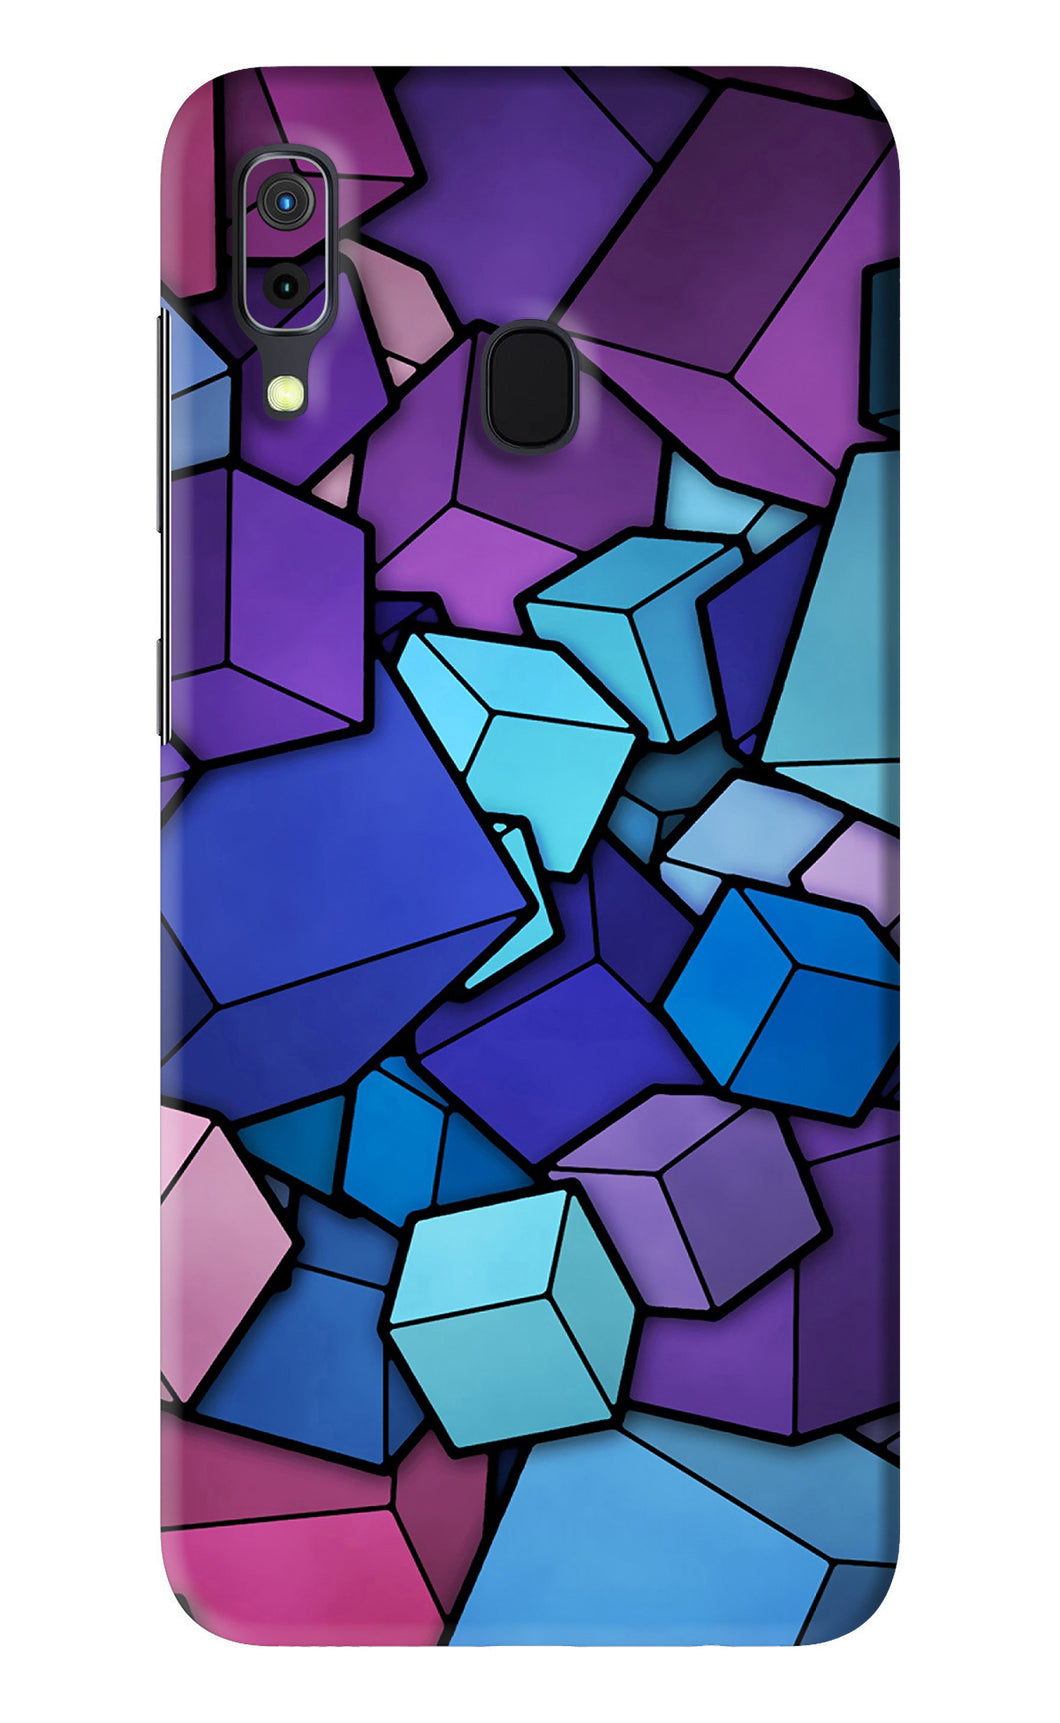 Cubic Abstract Samsung Galaxy A30 Back Skin Wrap